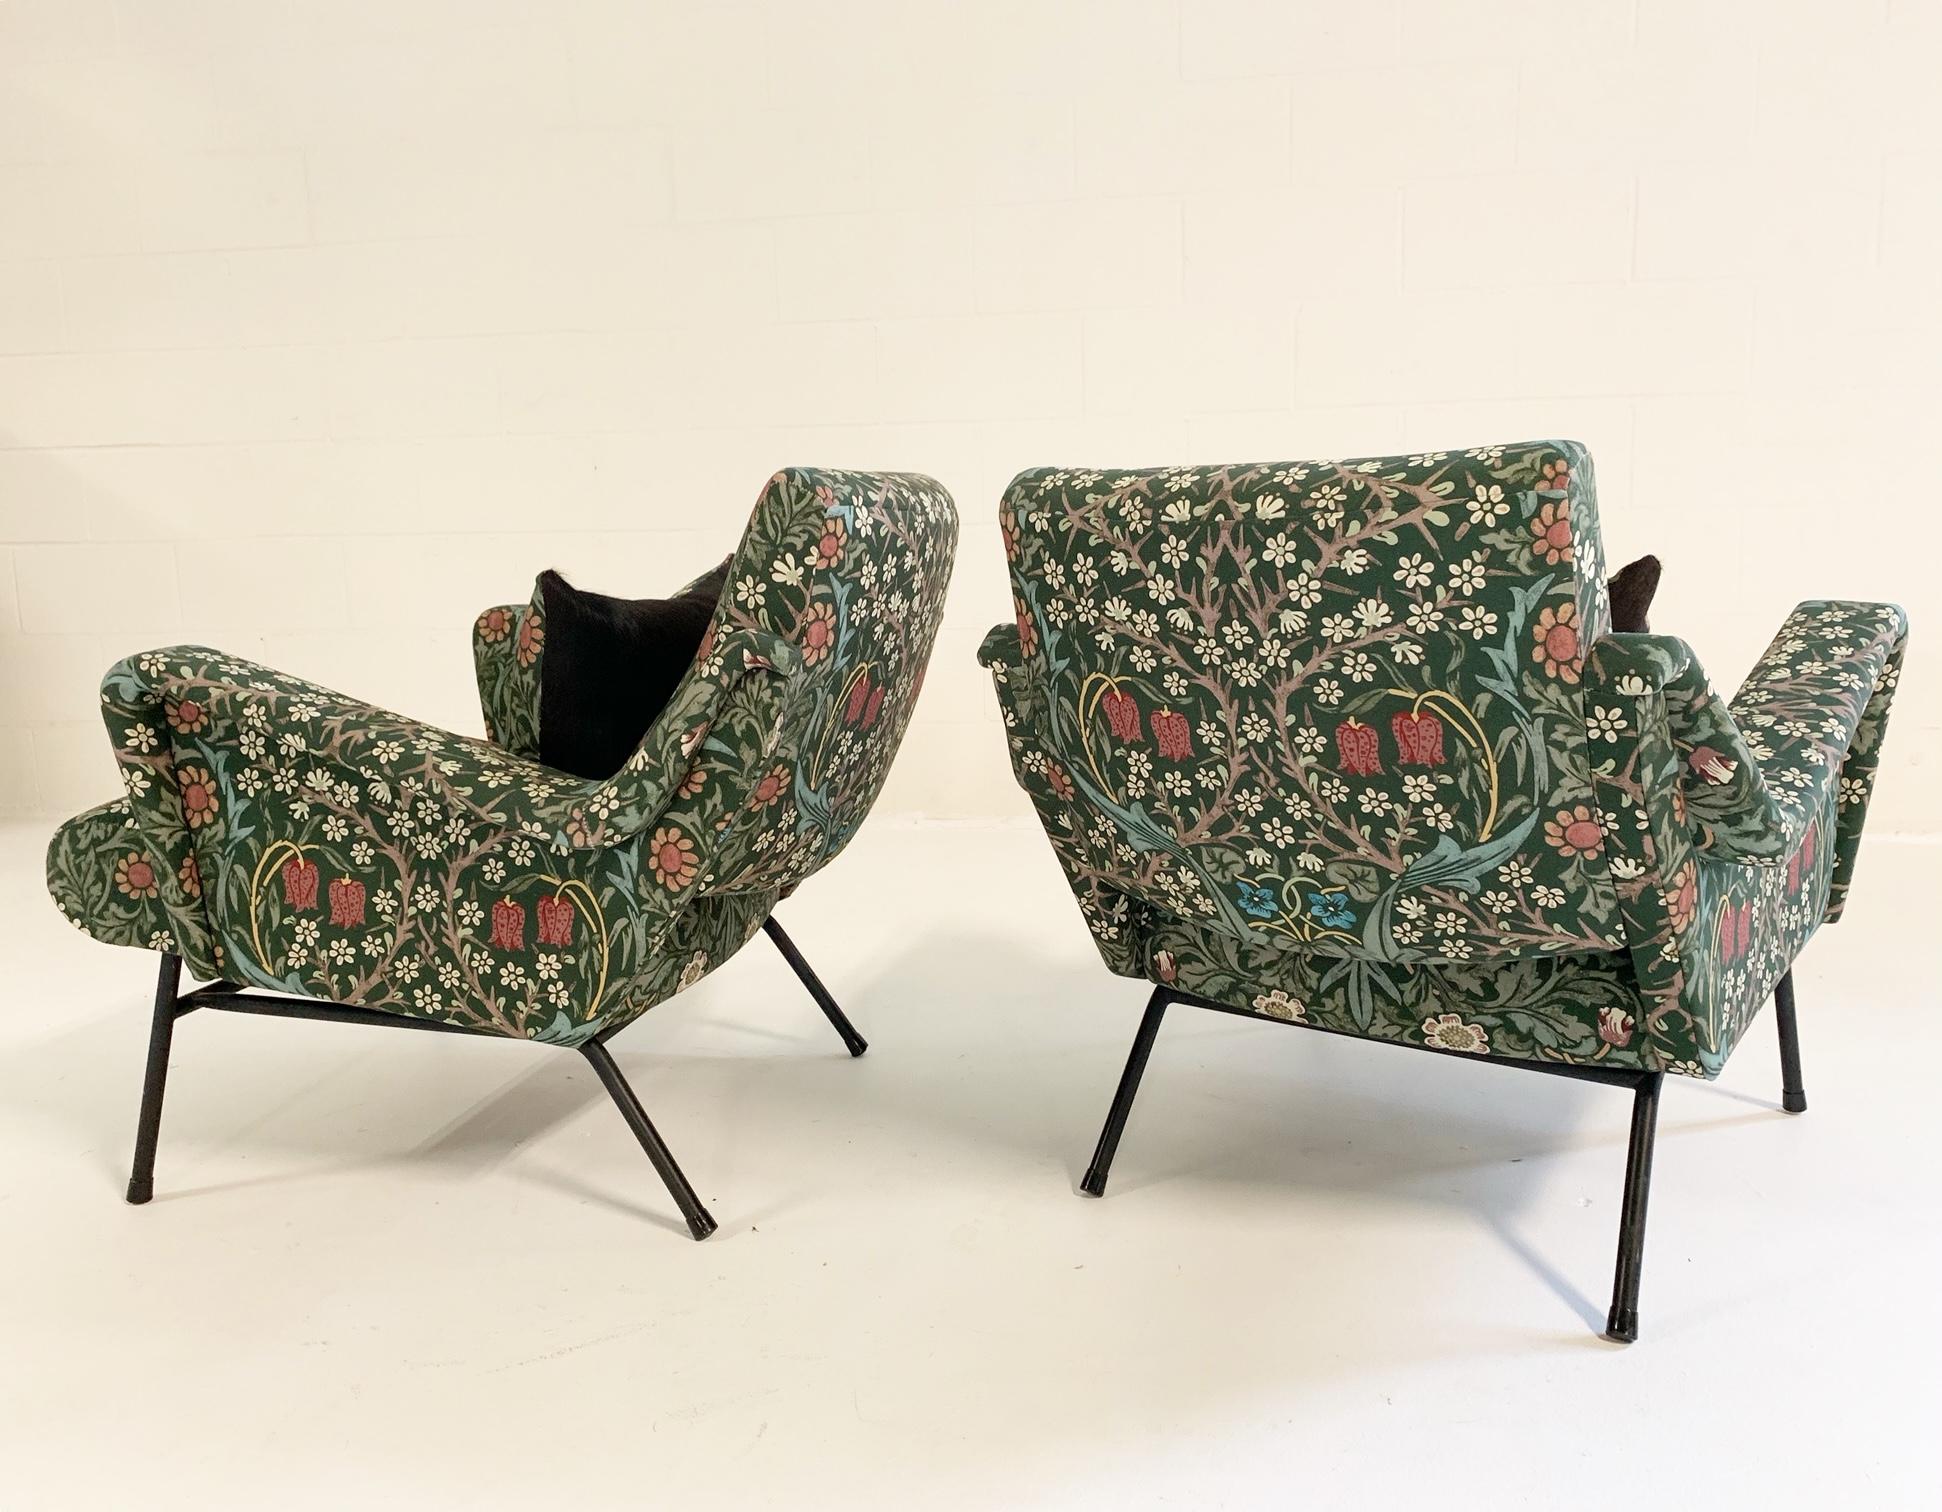 Steel Midcentury French Lounge Chairs in William Morris Blackthorn, Pair